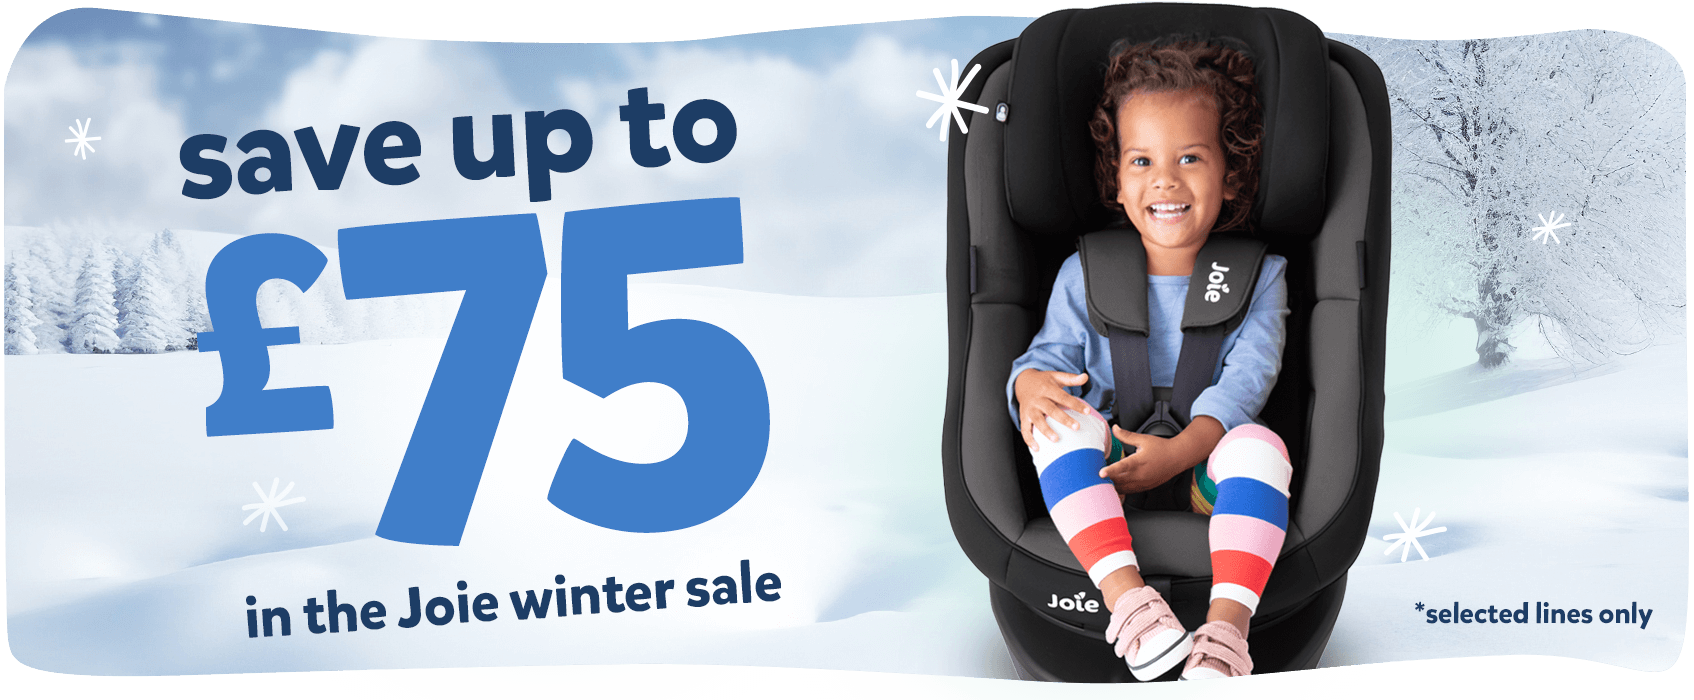 A Joie banner with a child in a car seat with text referencing the winter sale to save up to £75.